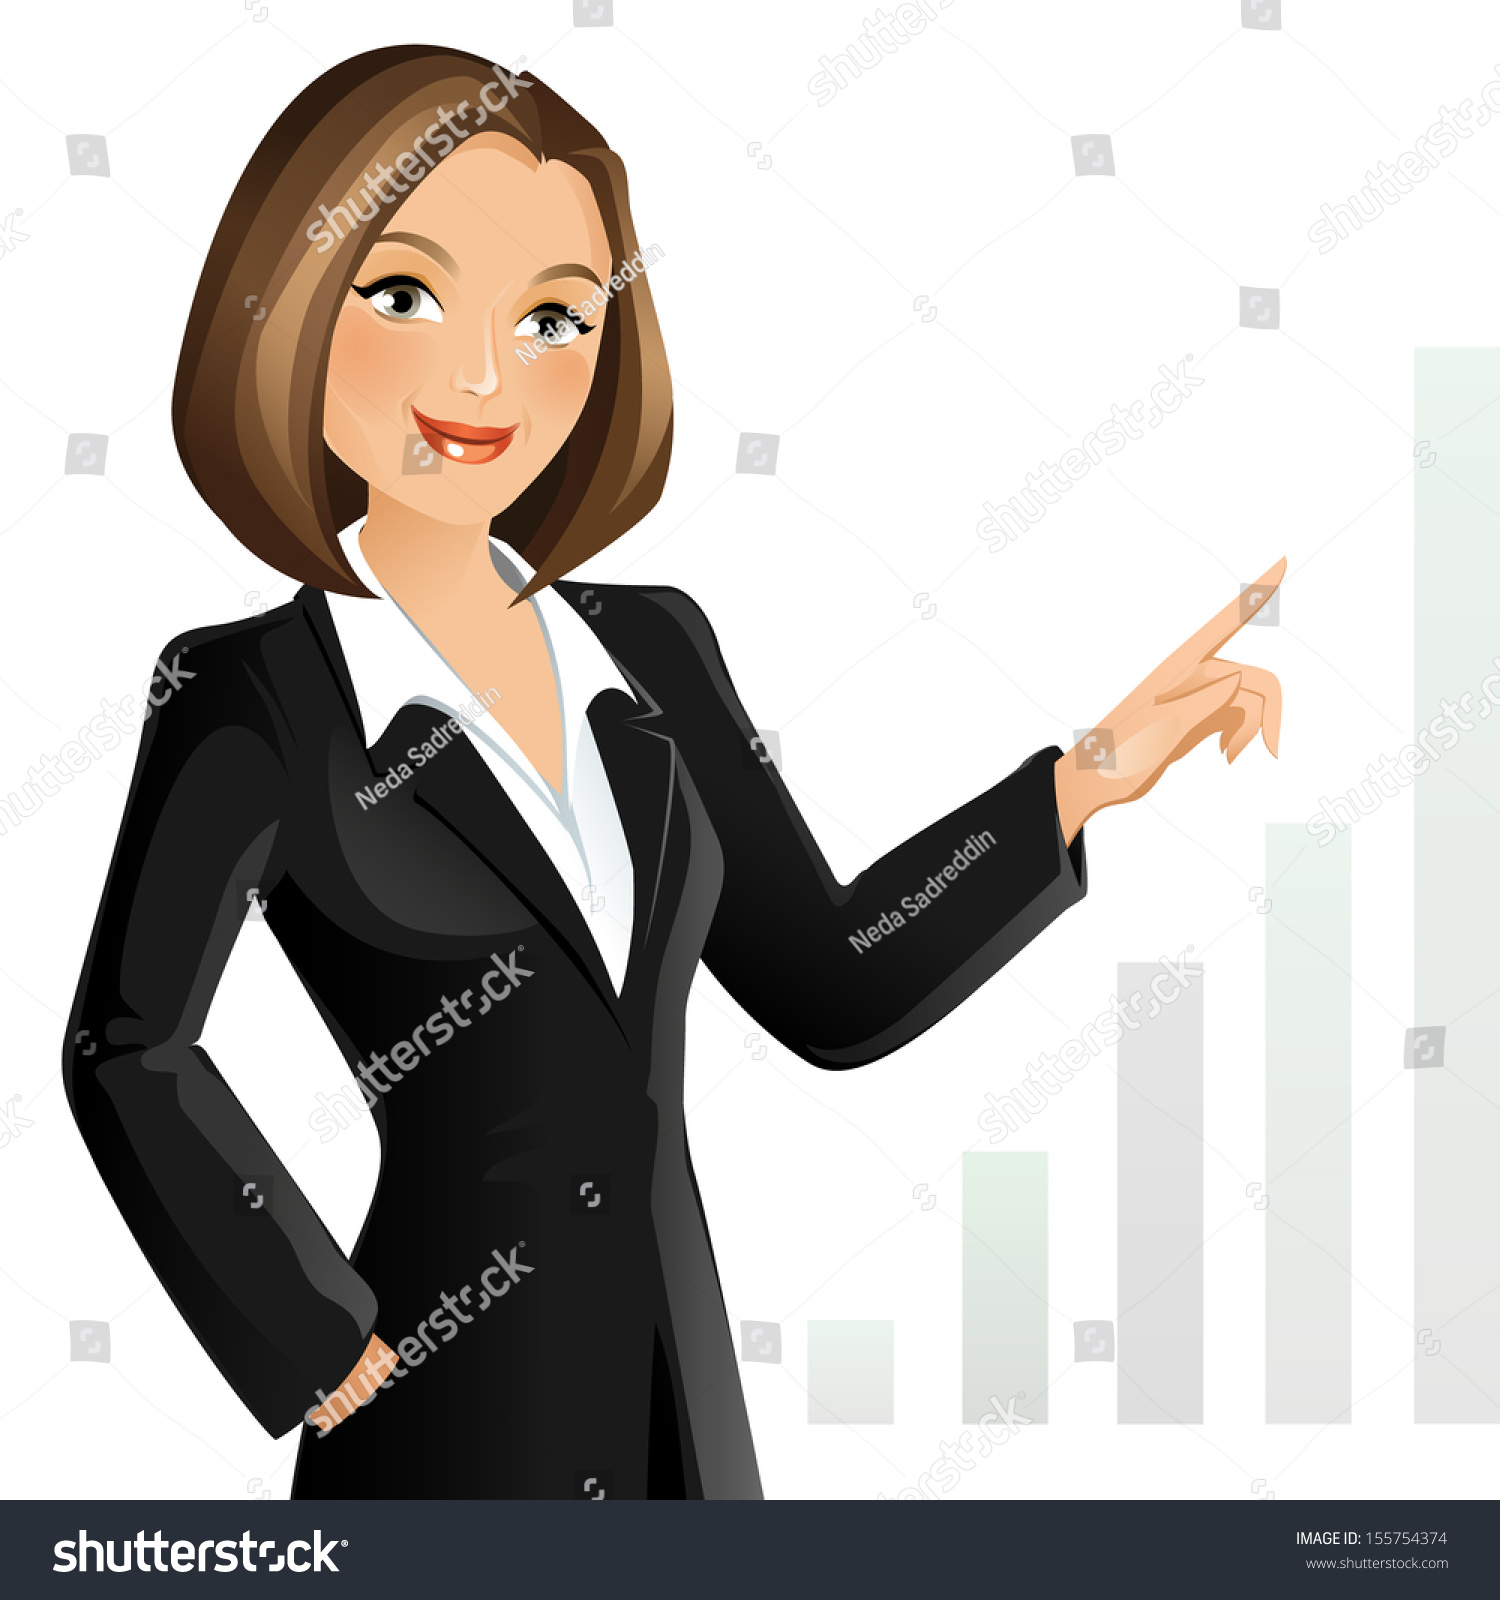 business education clipart - photo #19